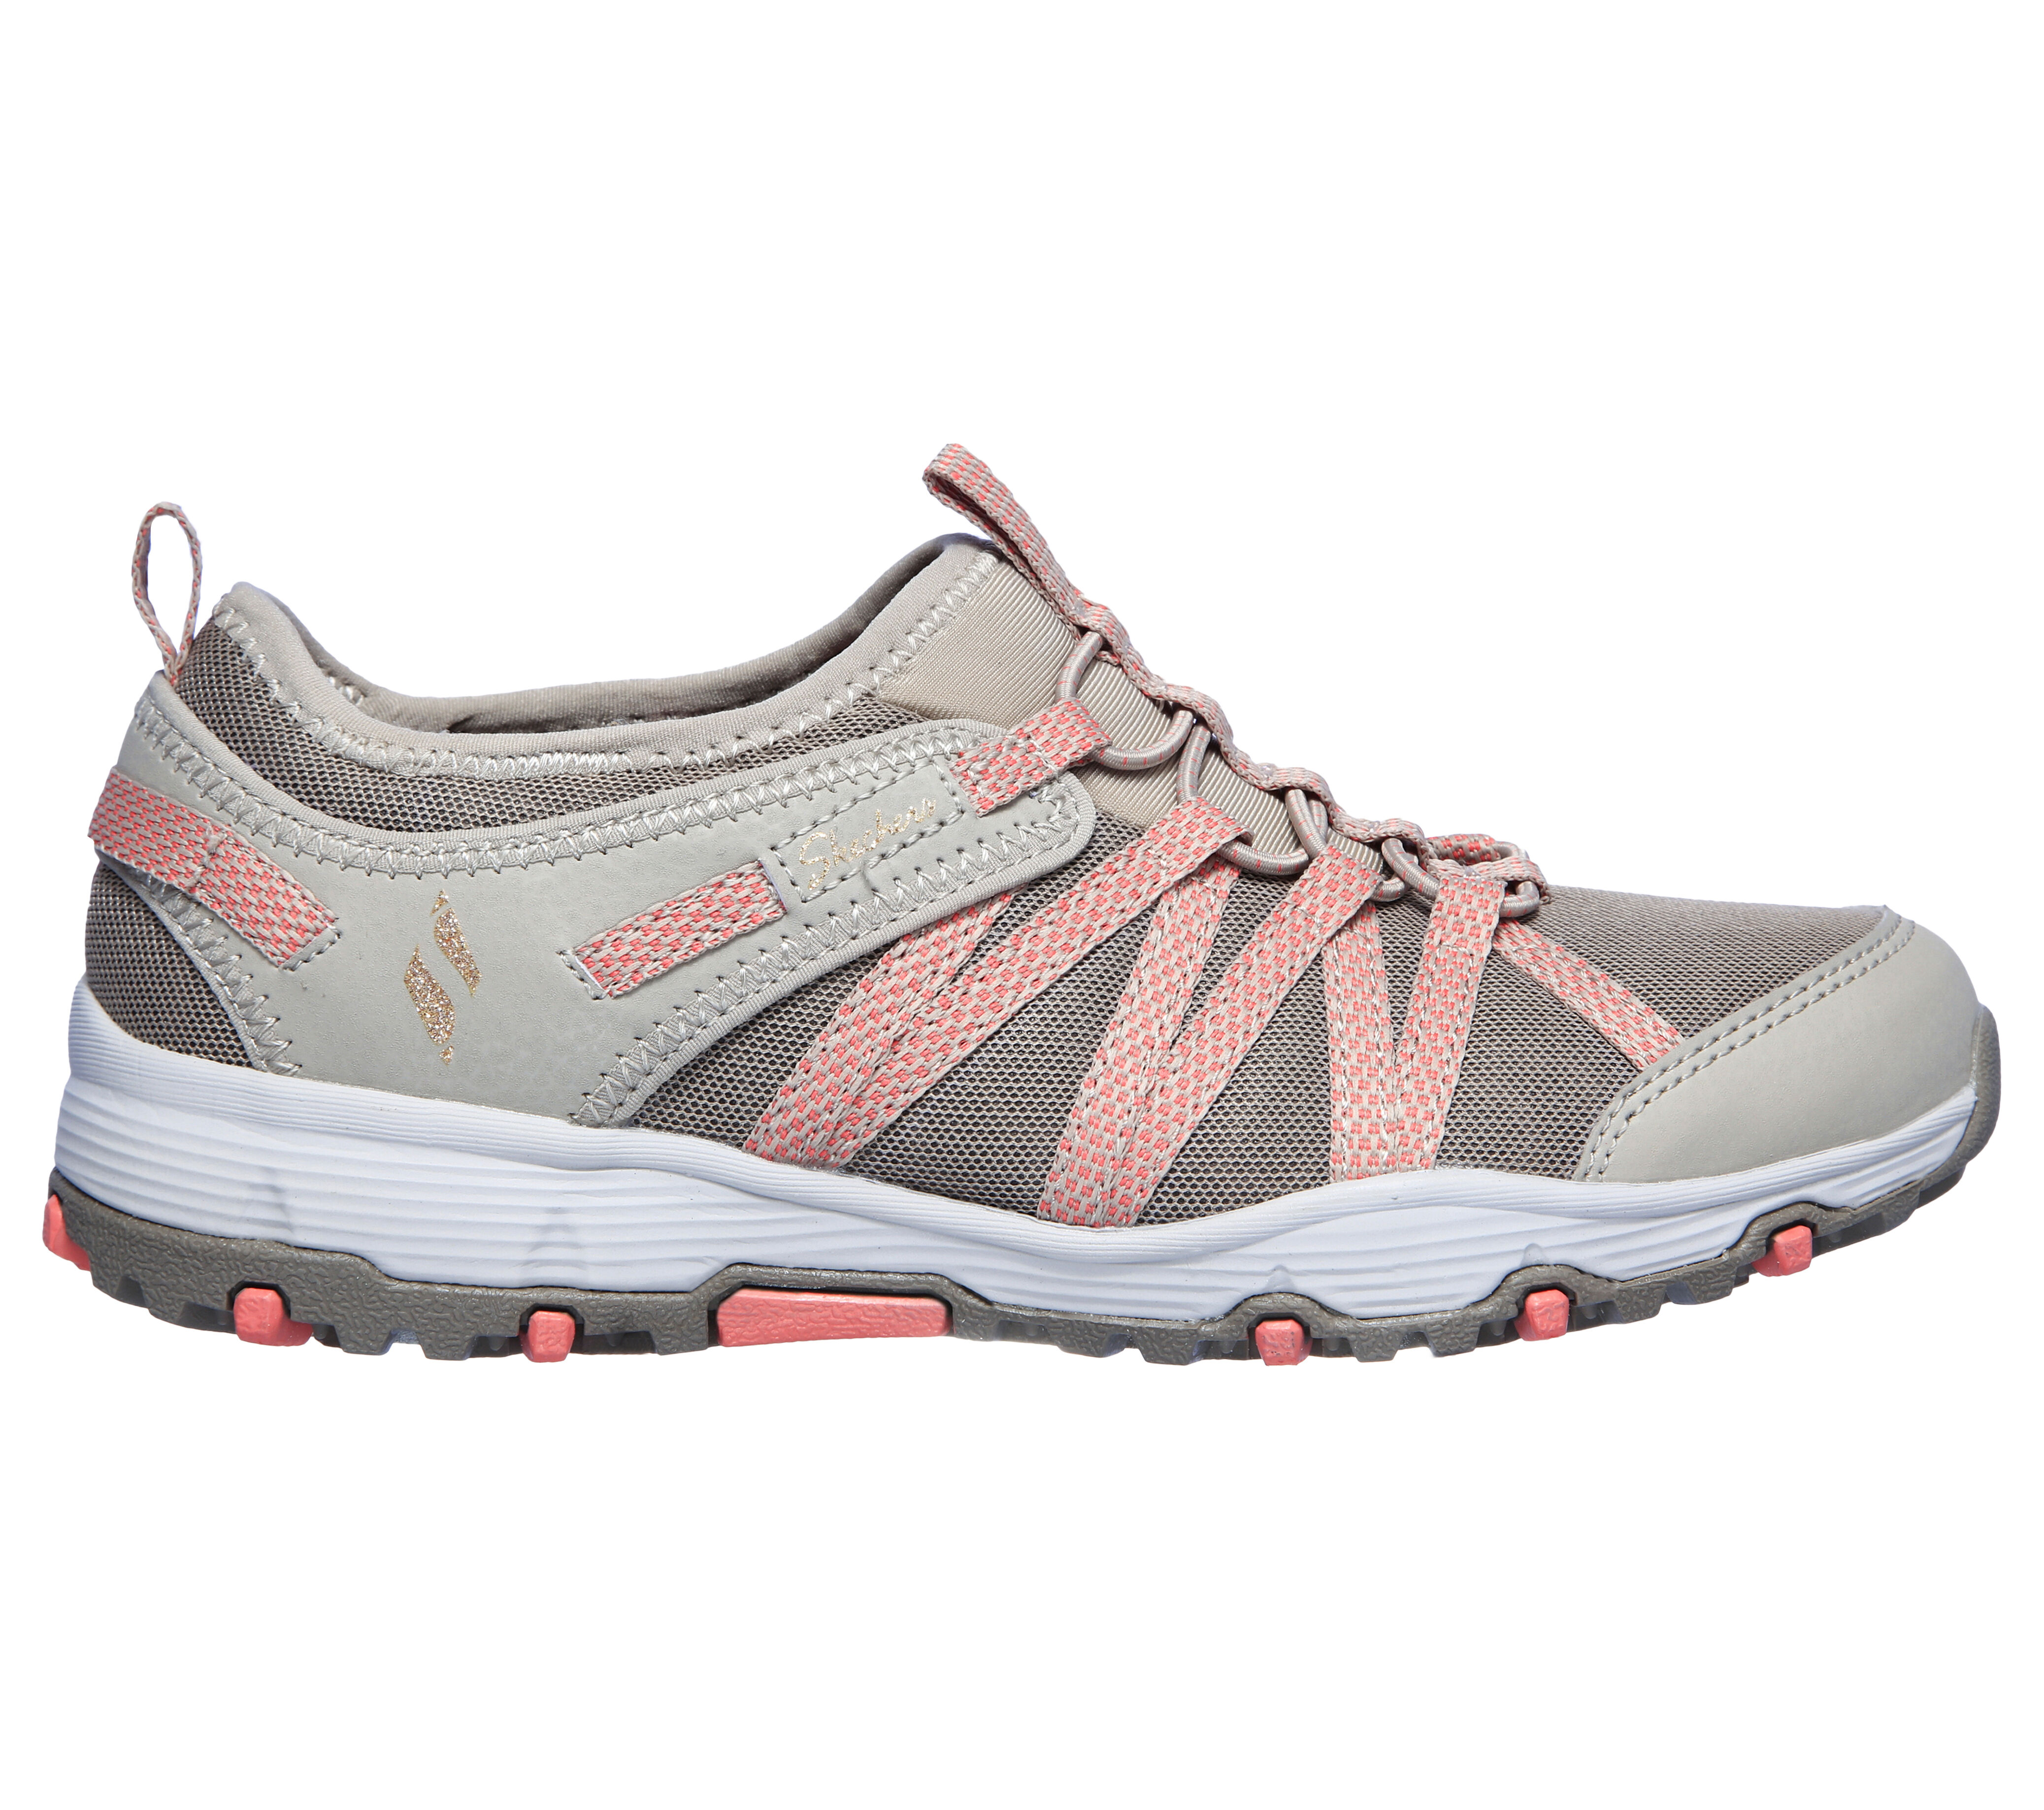 skechers outdoor lifestyle shoes